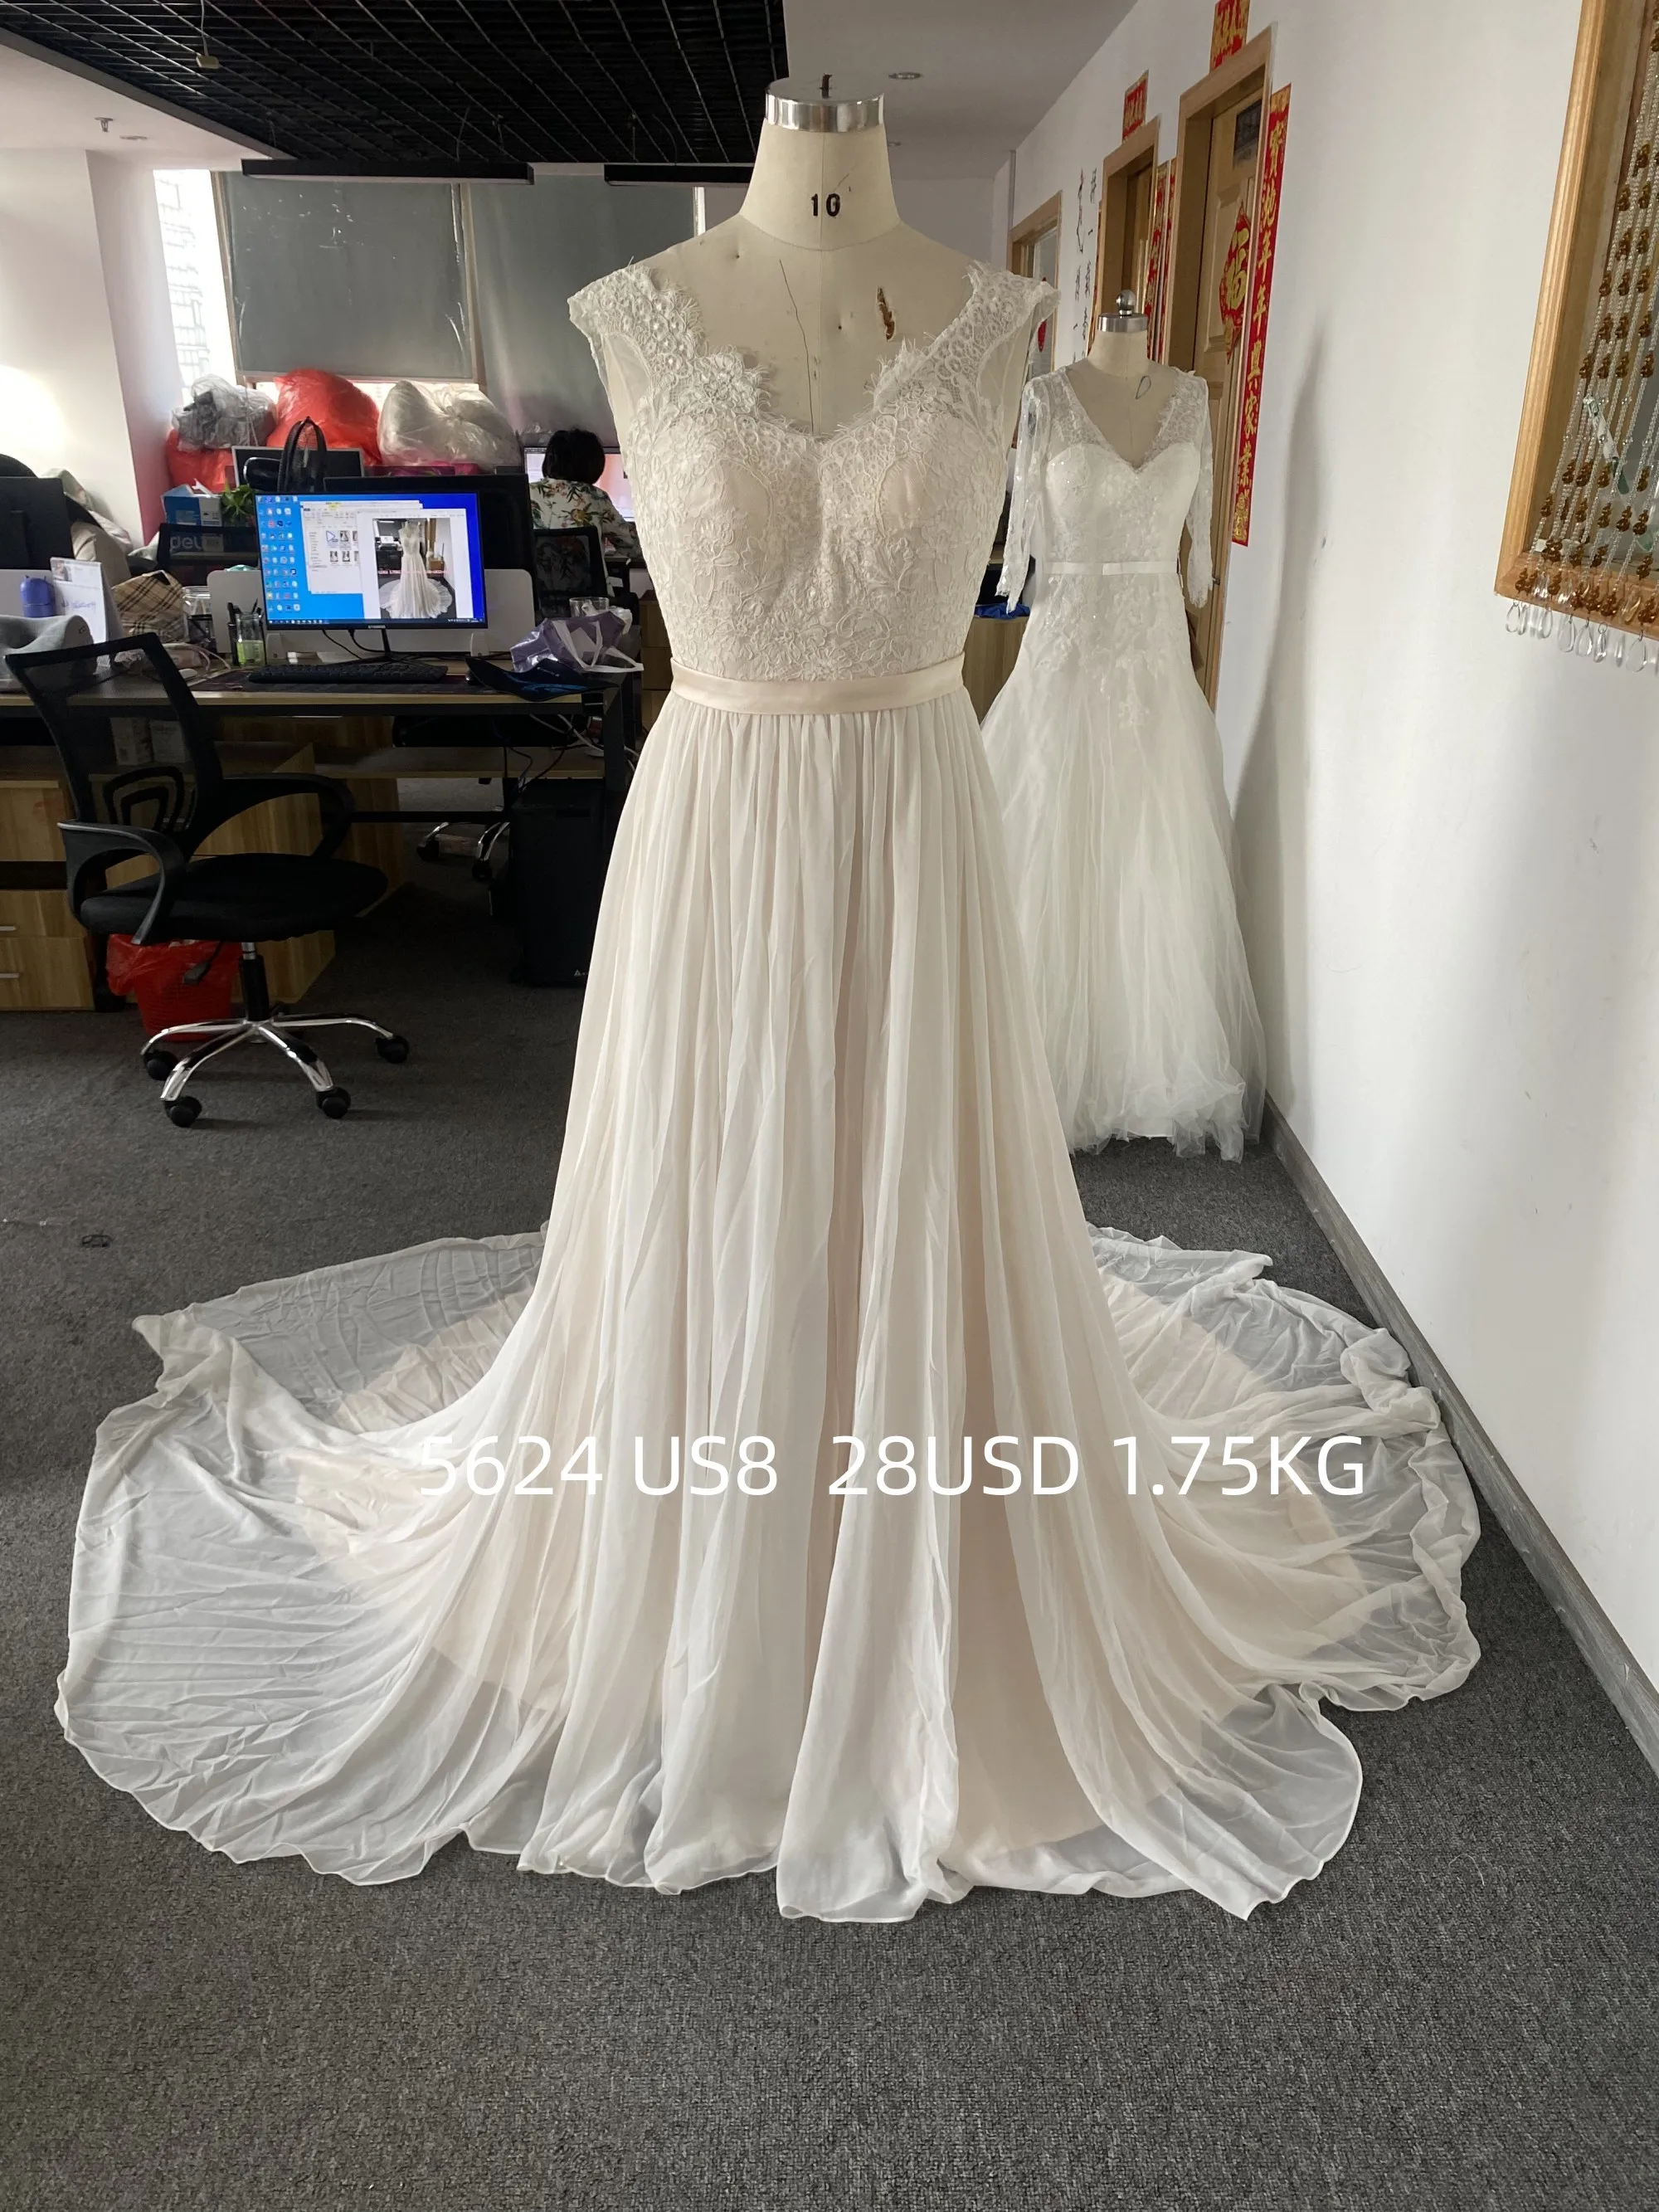 

CloverBridal Worthy Light Champagne A-line Chiffon+Lace Wedding Dress 2023 Discount Chapel Train Low Back Bridal Gown 5624